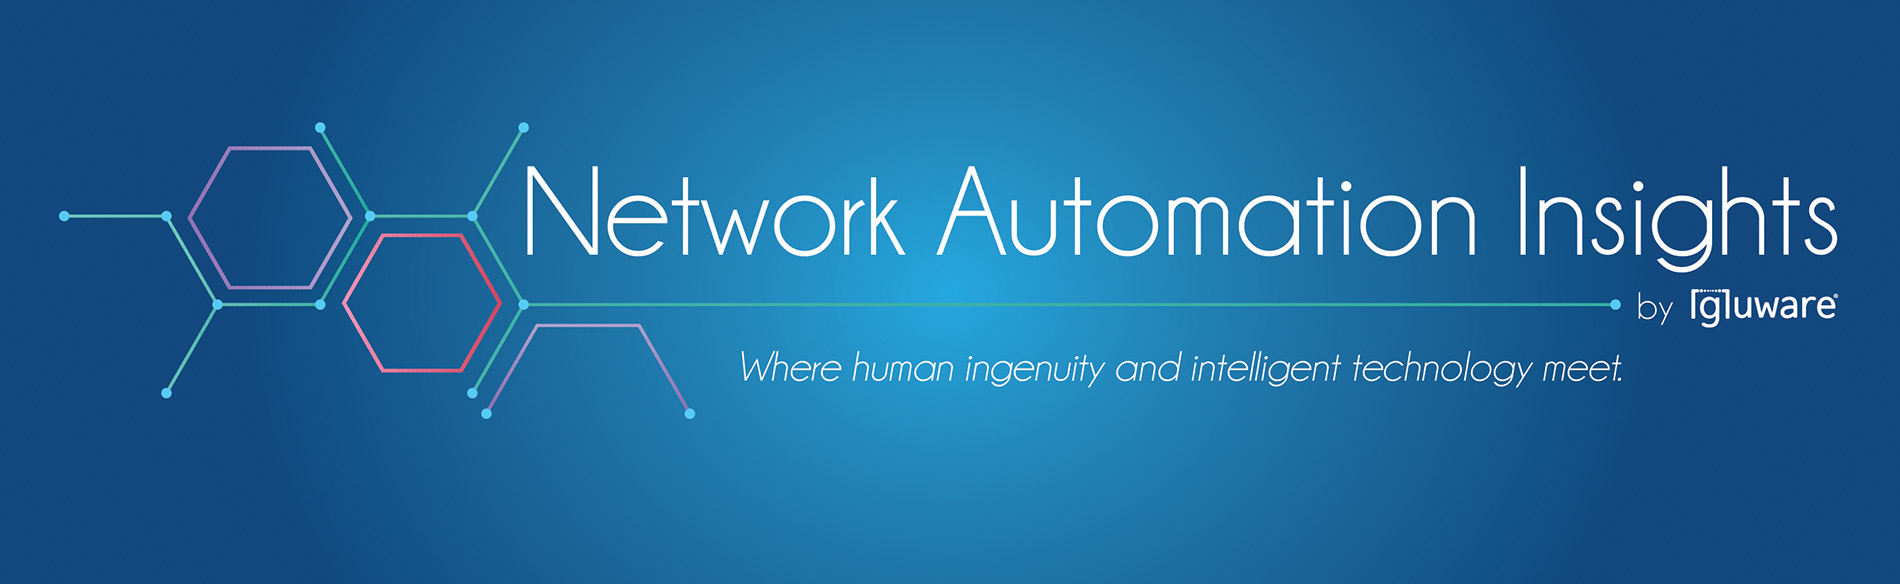 Network Automation Insights - Network Automation Insights